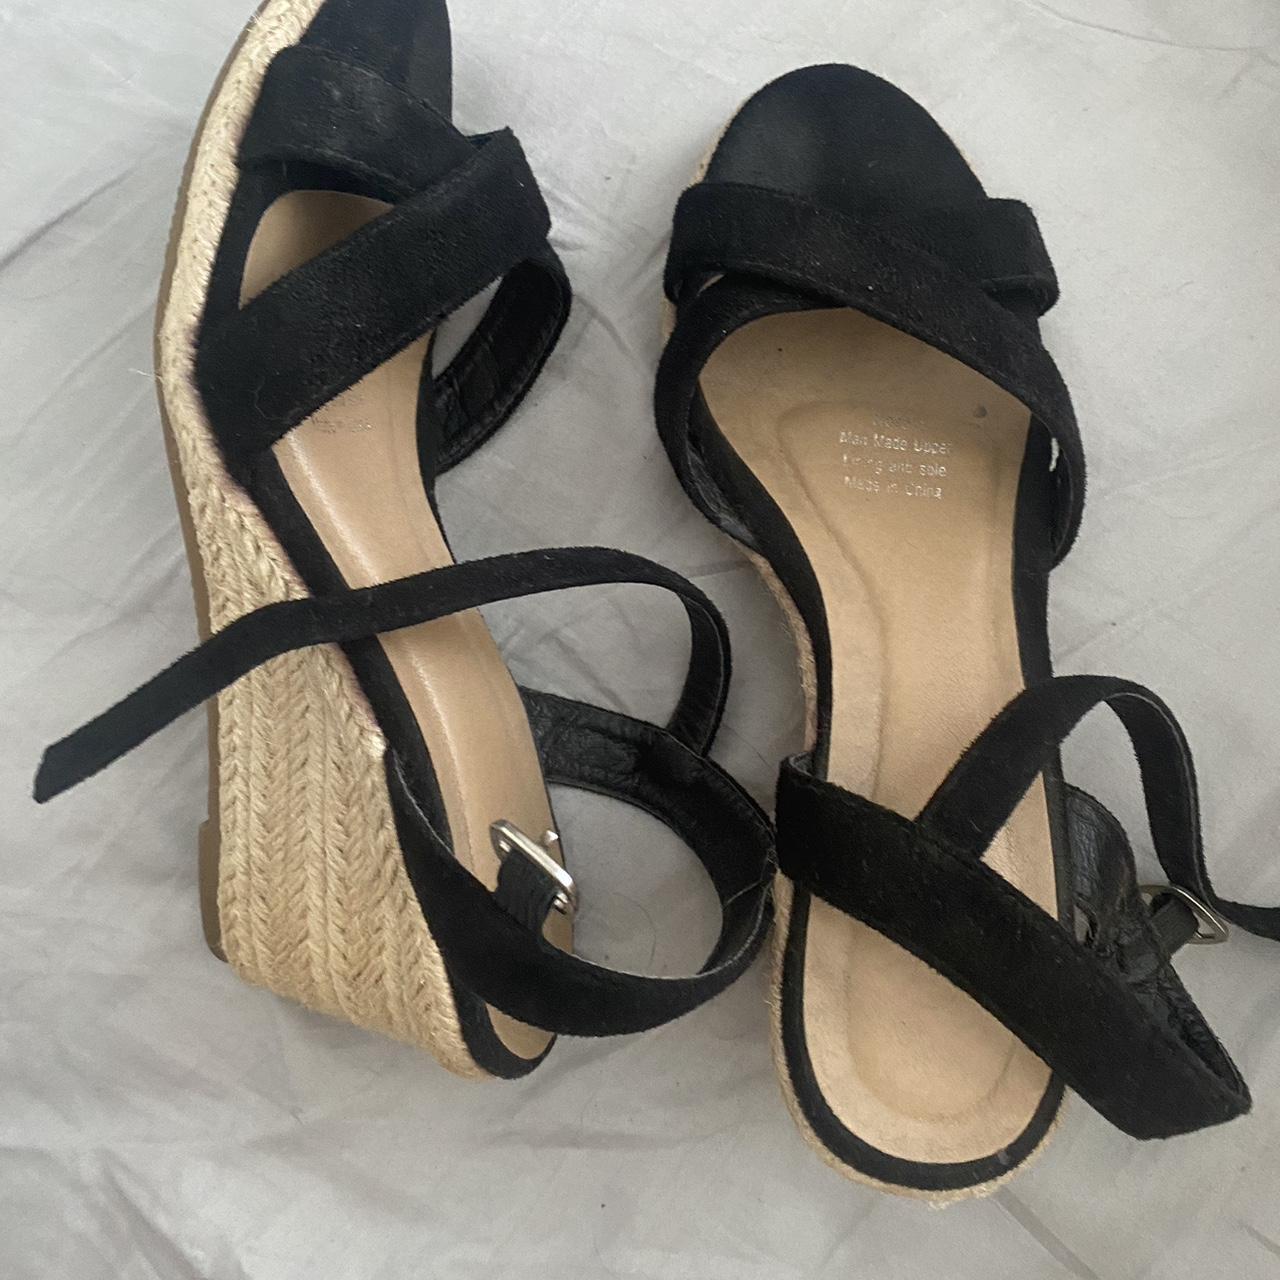 Wedges AU Size 8 Have some marks on the... - Depop